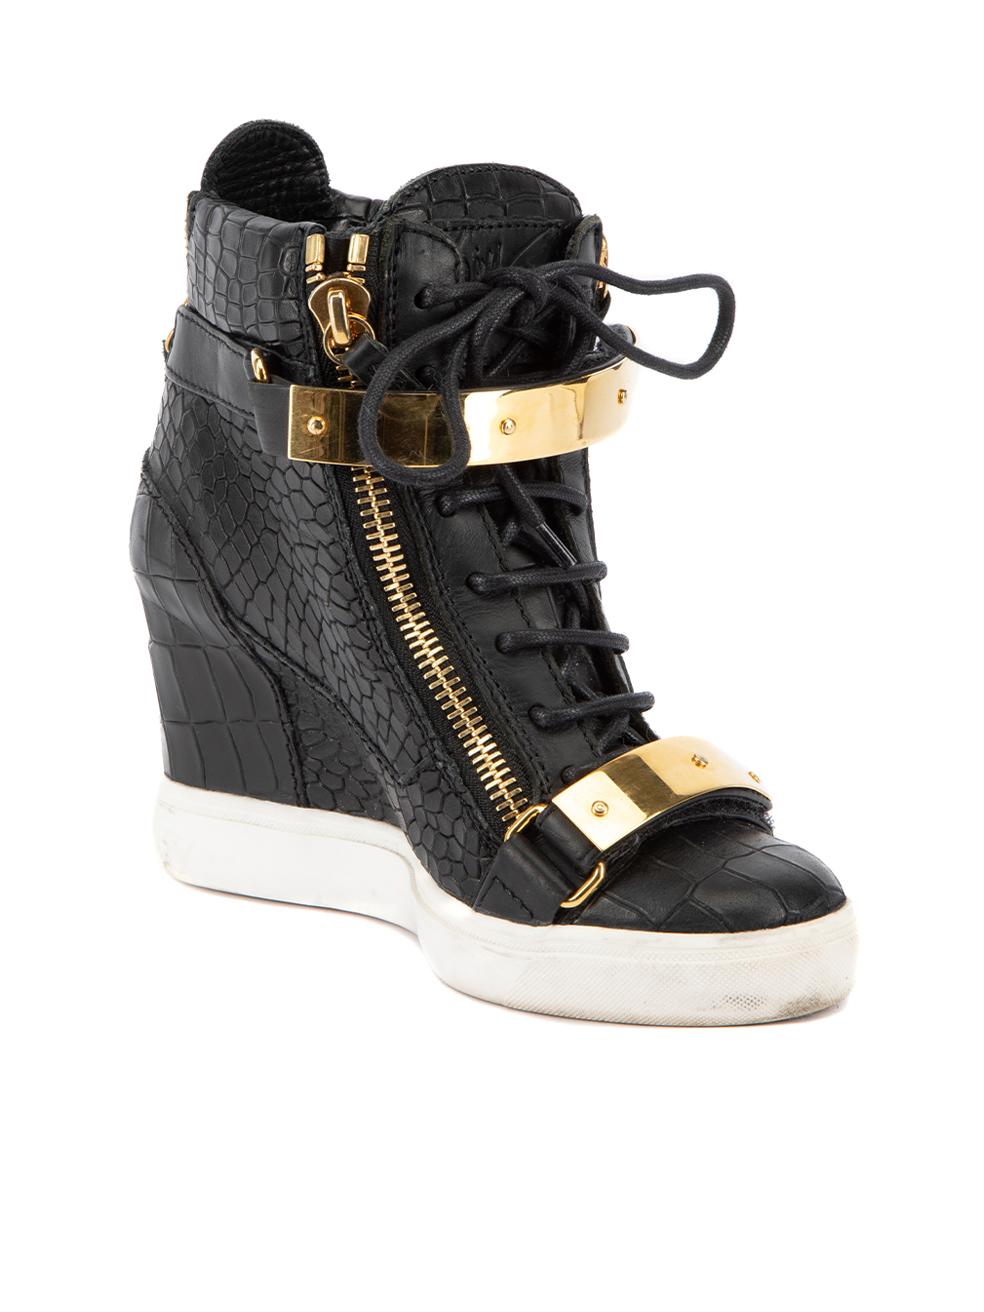 CONDITION is Very good.Hardly any visible wear to shoes is evident on this used Giuseppe Zanotti designer resale item.  Details  Black Leather High top trainers Crocodile embossed pattern Wedge heel Round toe Gold plate and zip accent Lace up with